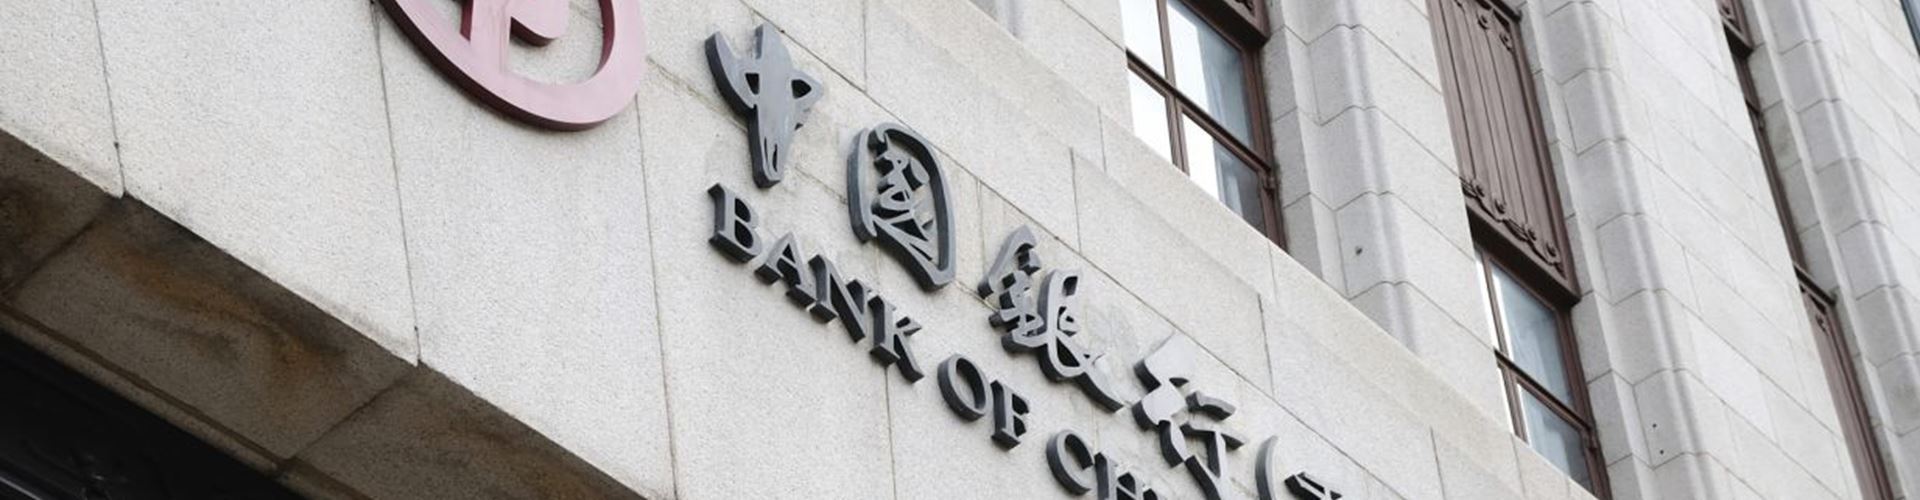 Bank of China weighs up European interest in shares